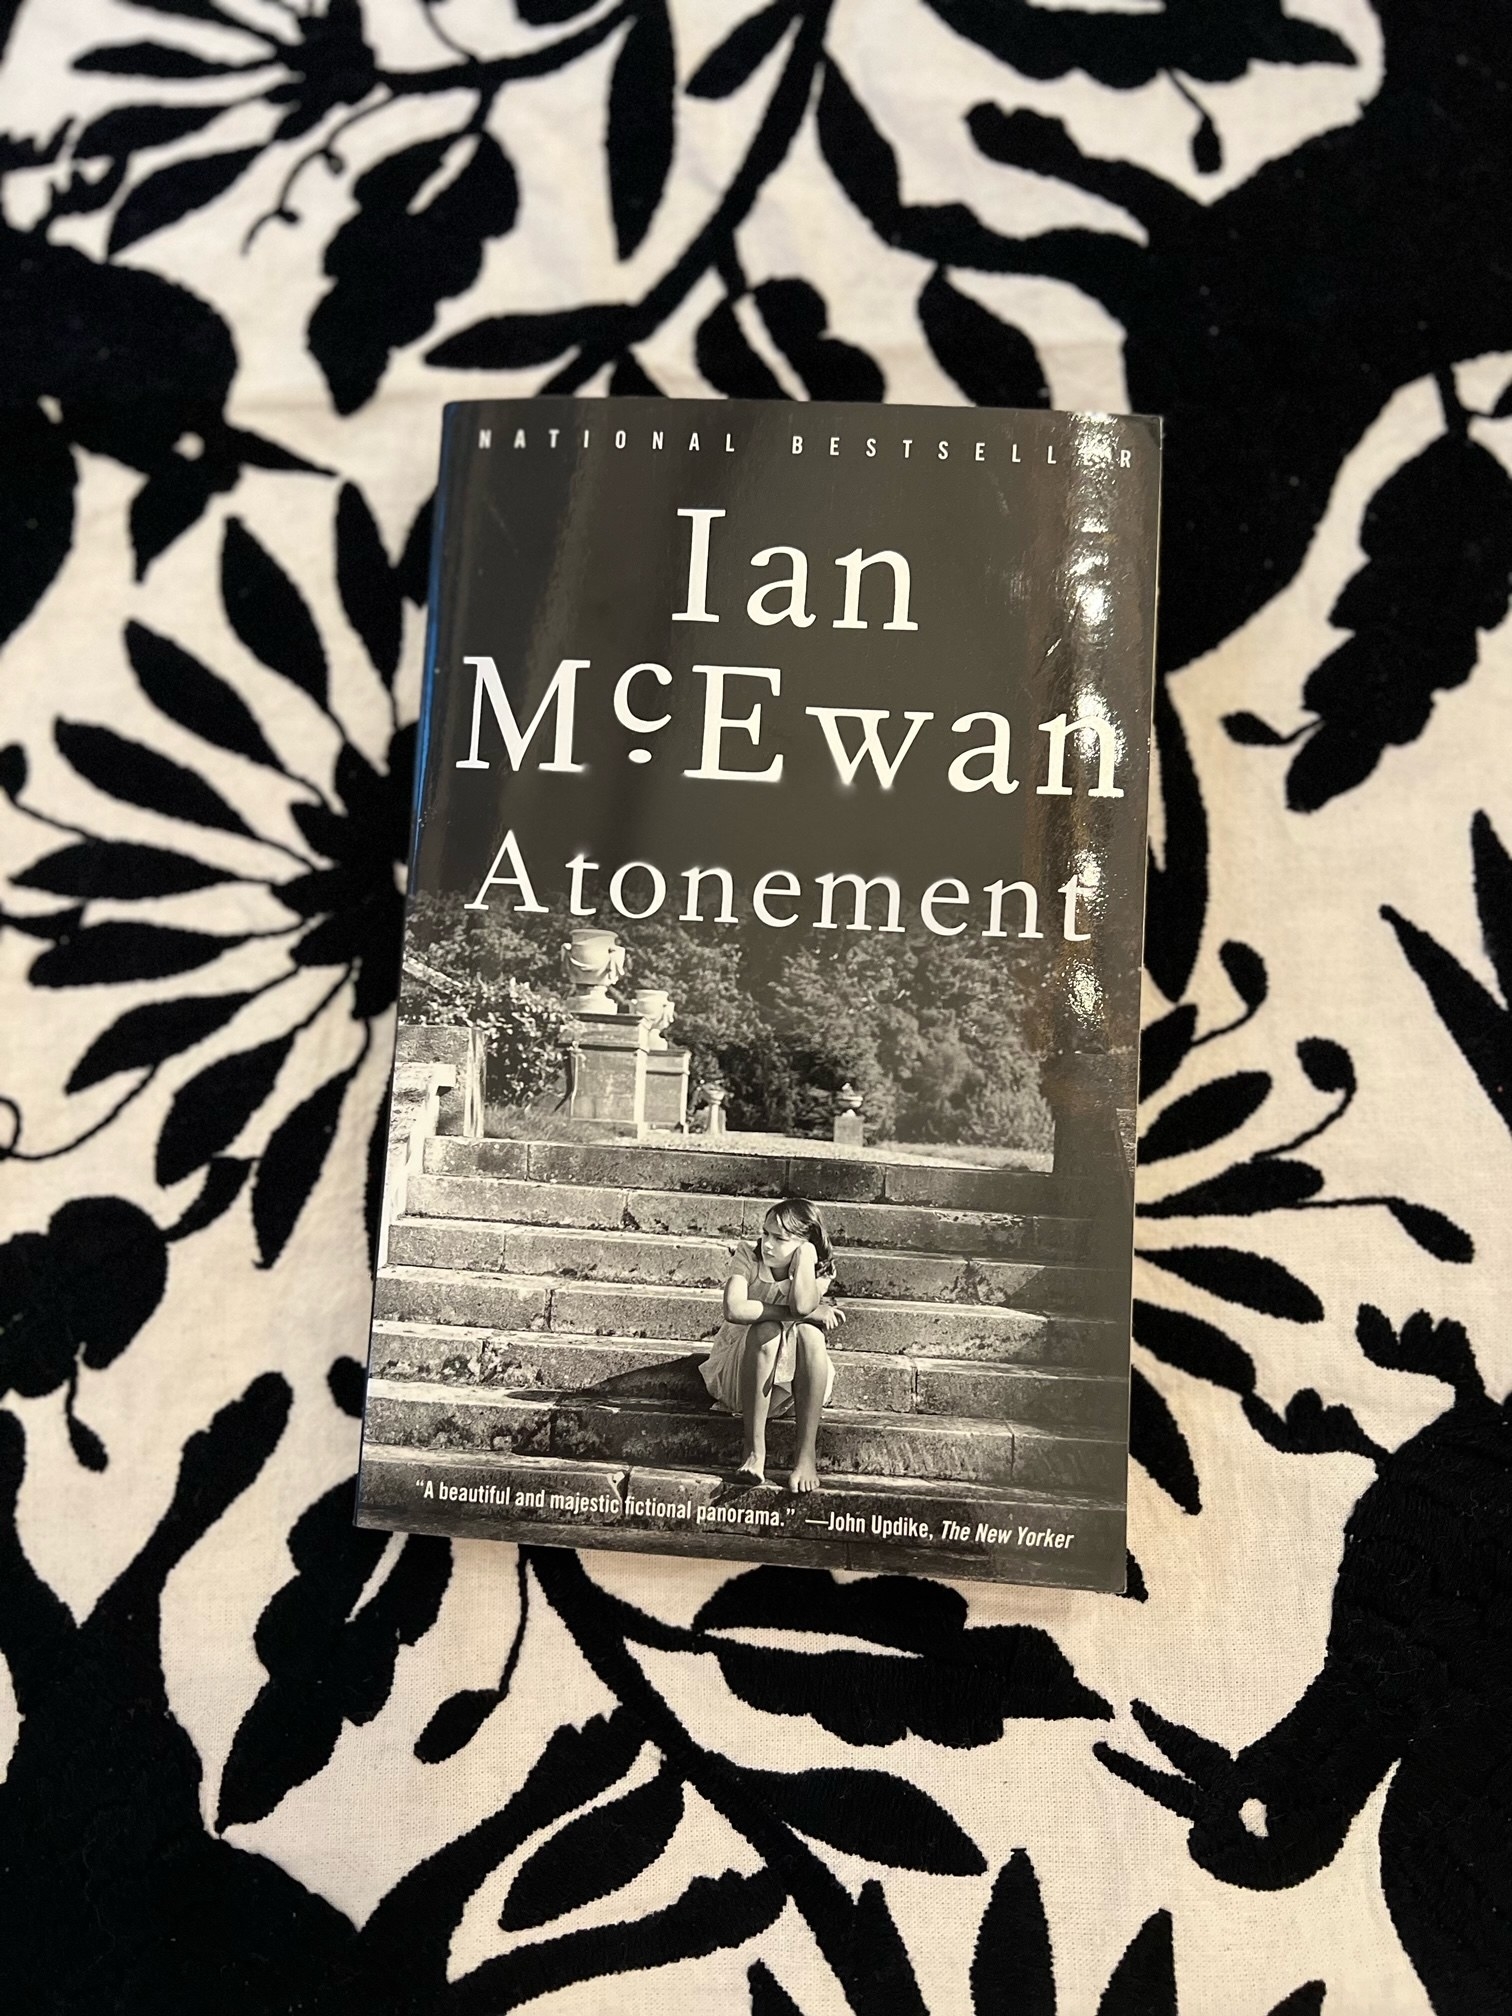 The book cover of &quot;Atonement&quot; by Ian McEwan.